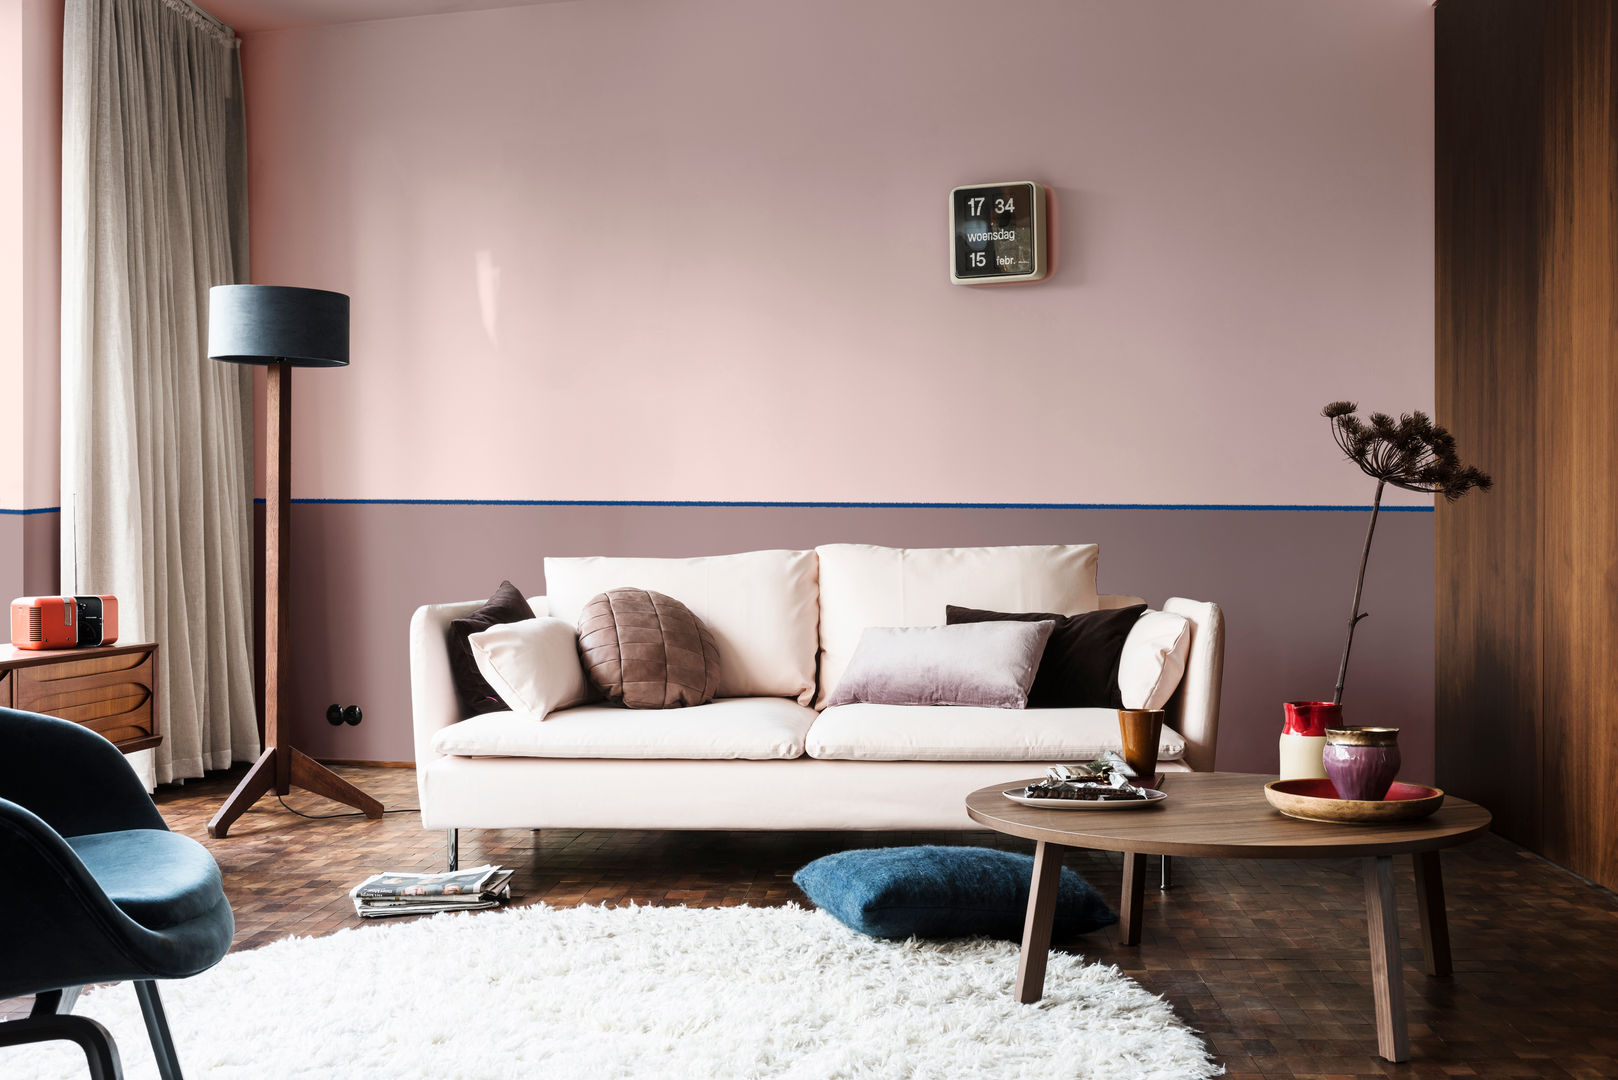 The Heart Wood Home Dulux UK Salones escandinavos pink,living room,lounge,heartwood,heart wood,paint,dulux,purple,colour of the year,relaxed,scandinavian,tonal